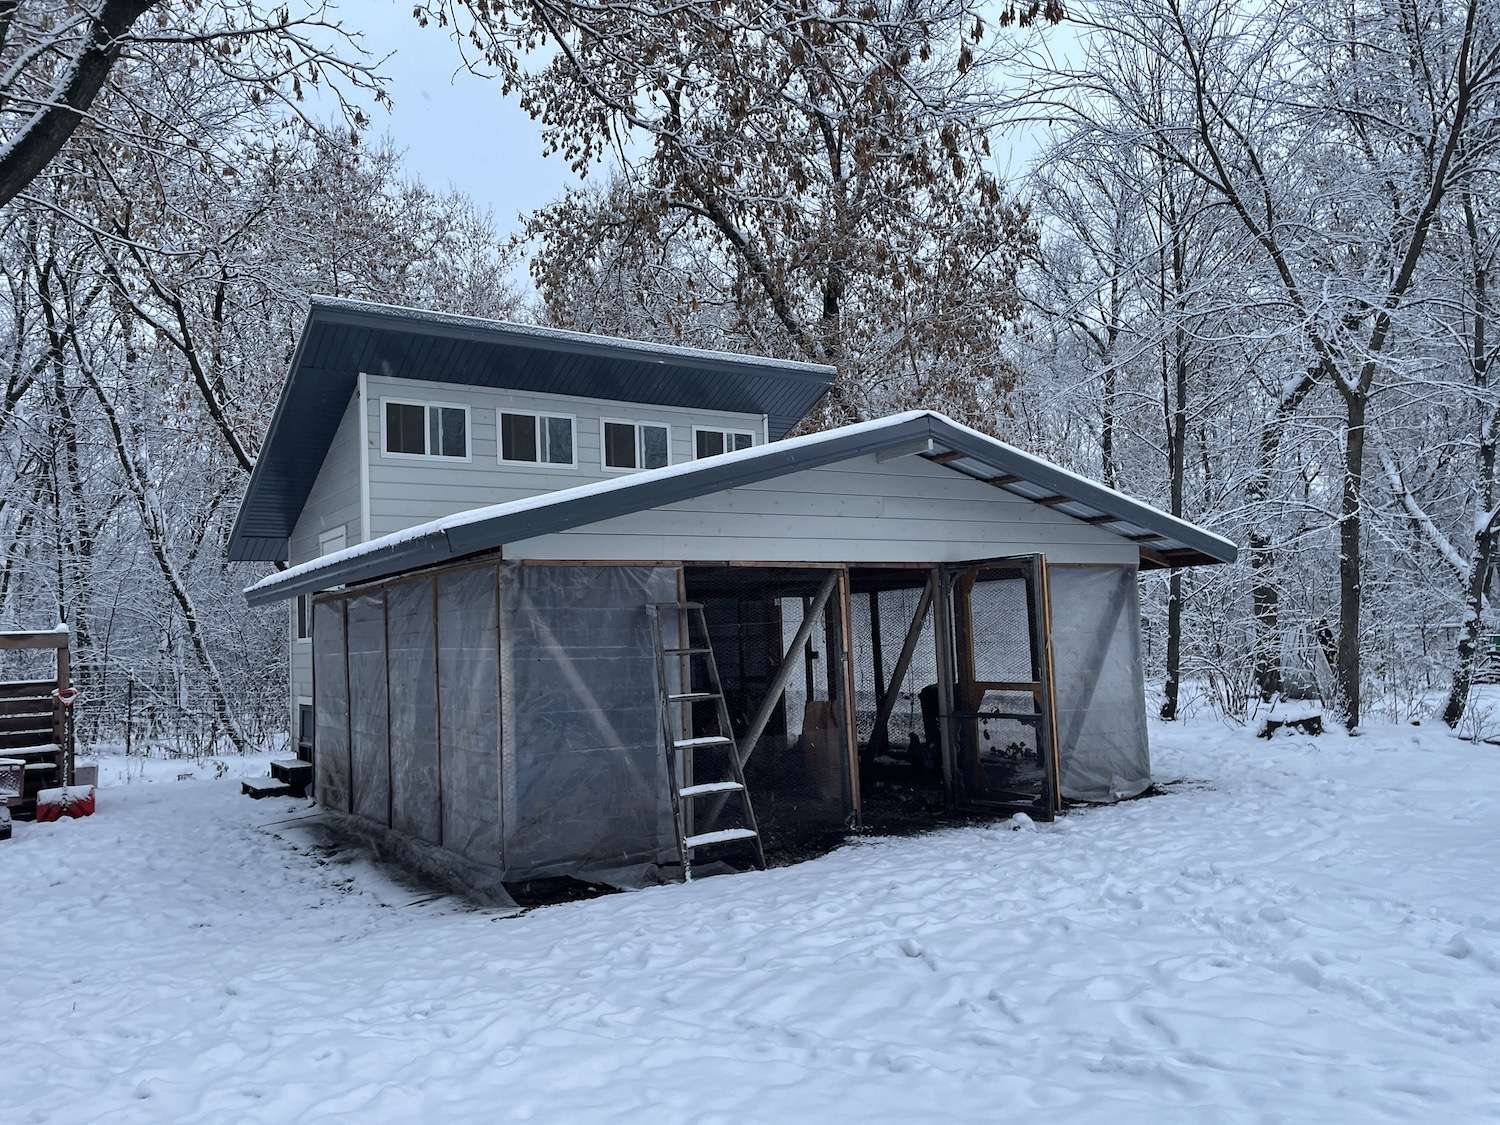 A photo of my chicken coop in the winter with snow